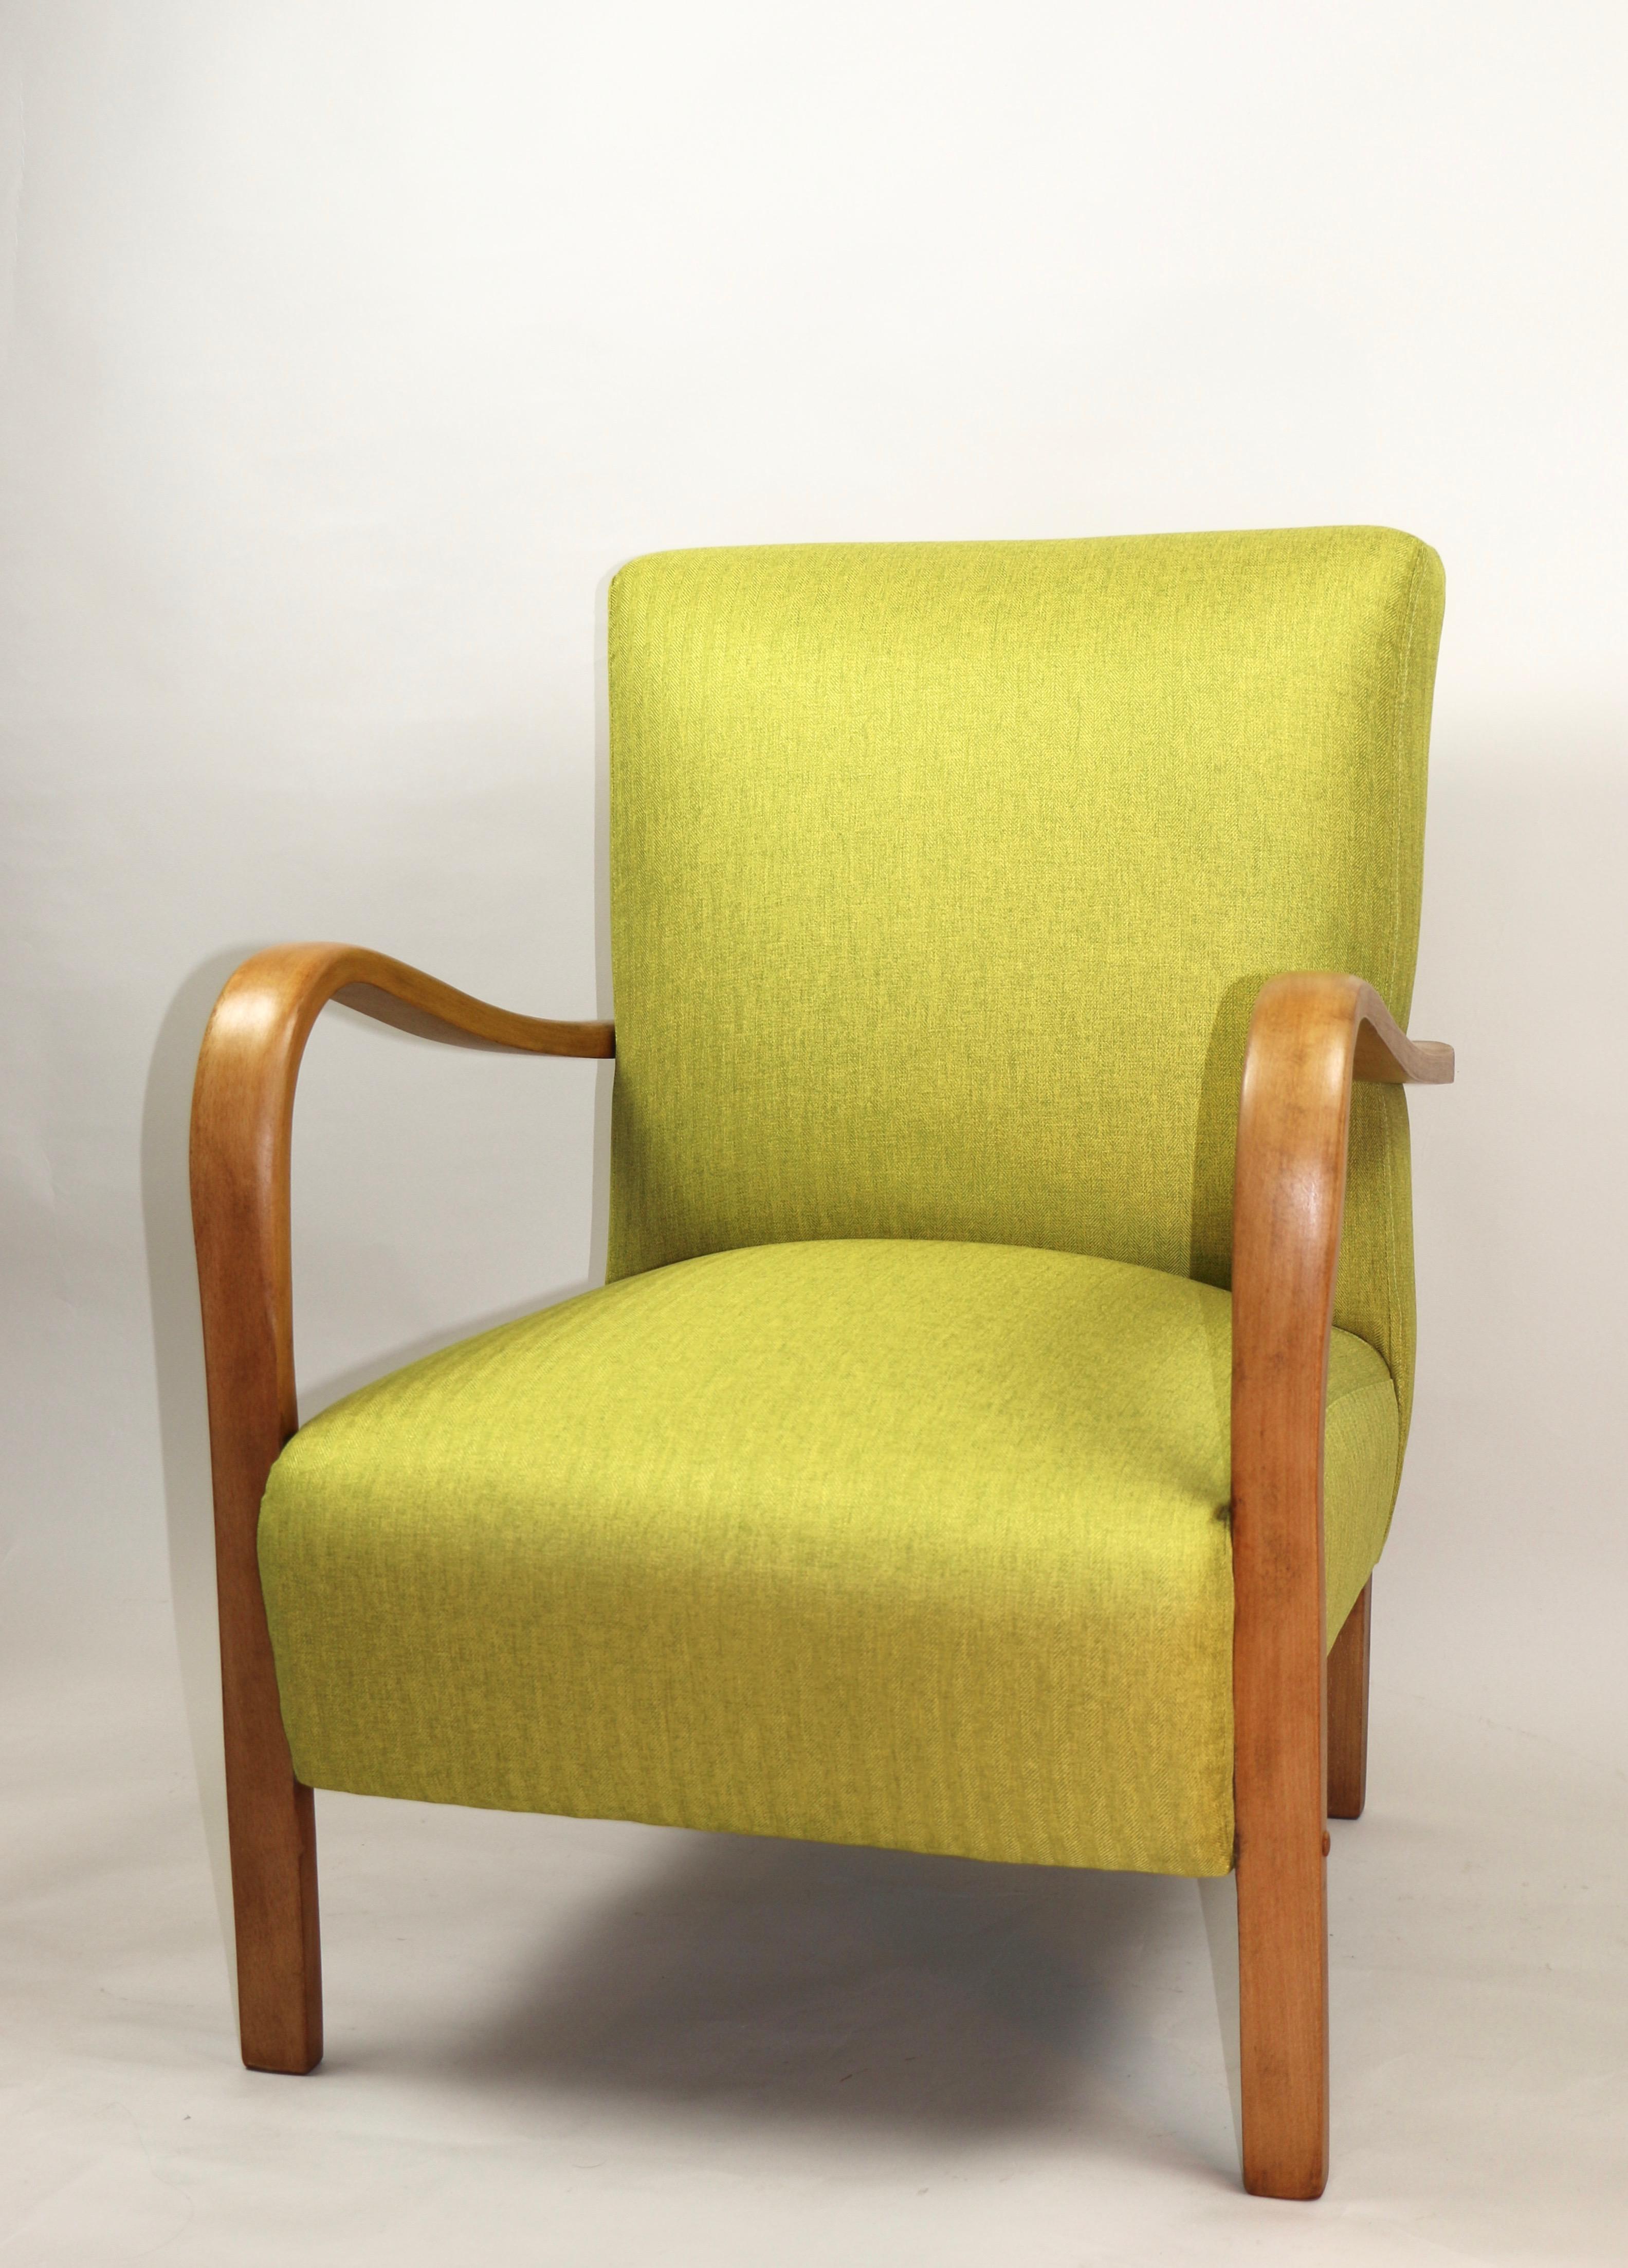 Polish Art Deco Armchair in Yellow from 20th Century For Sale